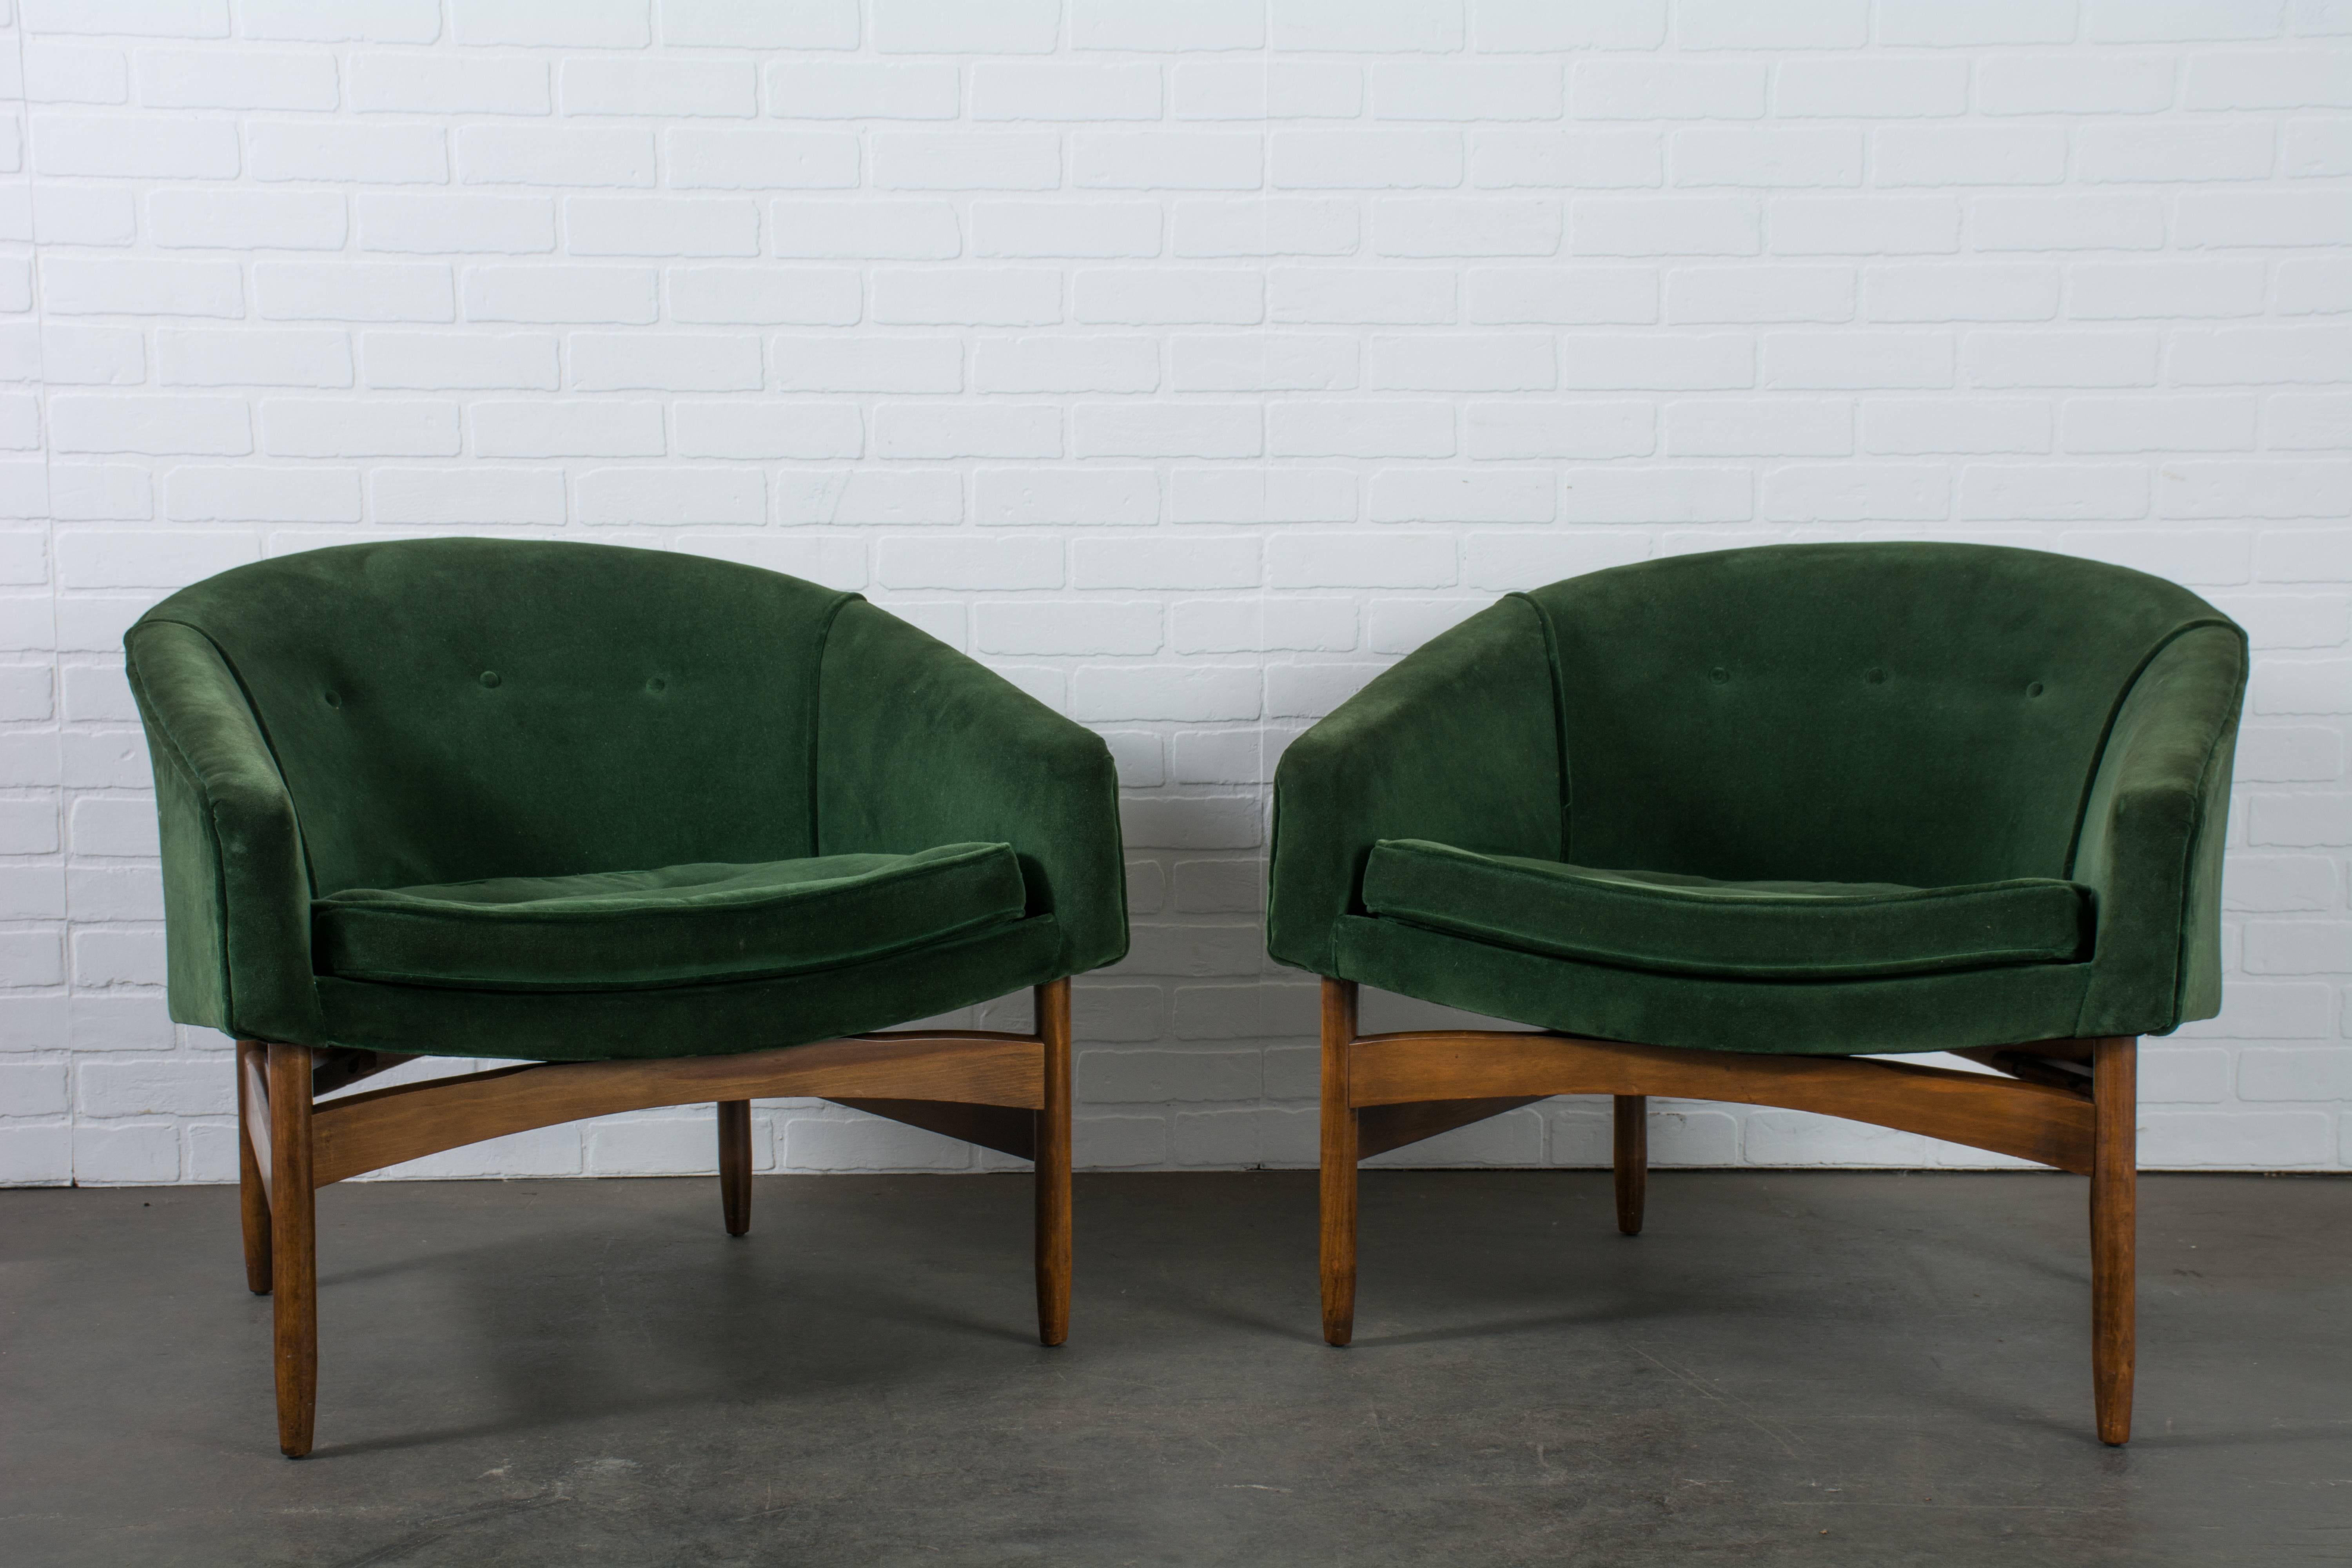 This pair of vintage Mid-Century barrel back lounge chairs were designed by Lawrence Peabody for Richardson Nemschoff in 1958. They feature walnut frames and forest green upholstered seats. Original upholstery, but the straps and seat cushions are